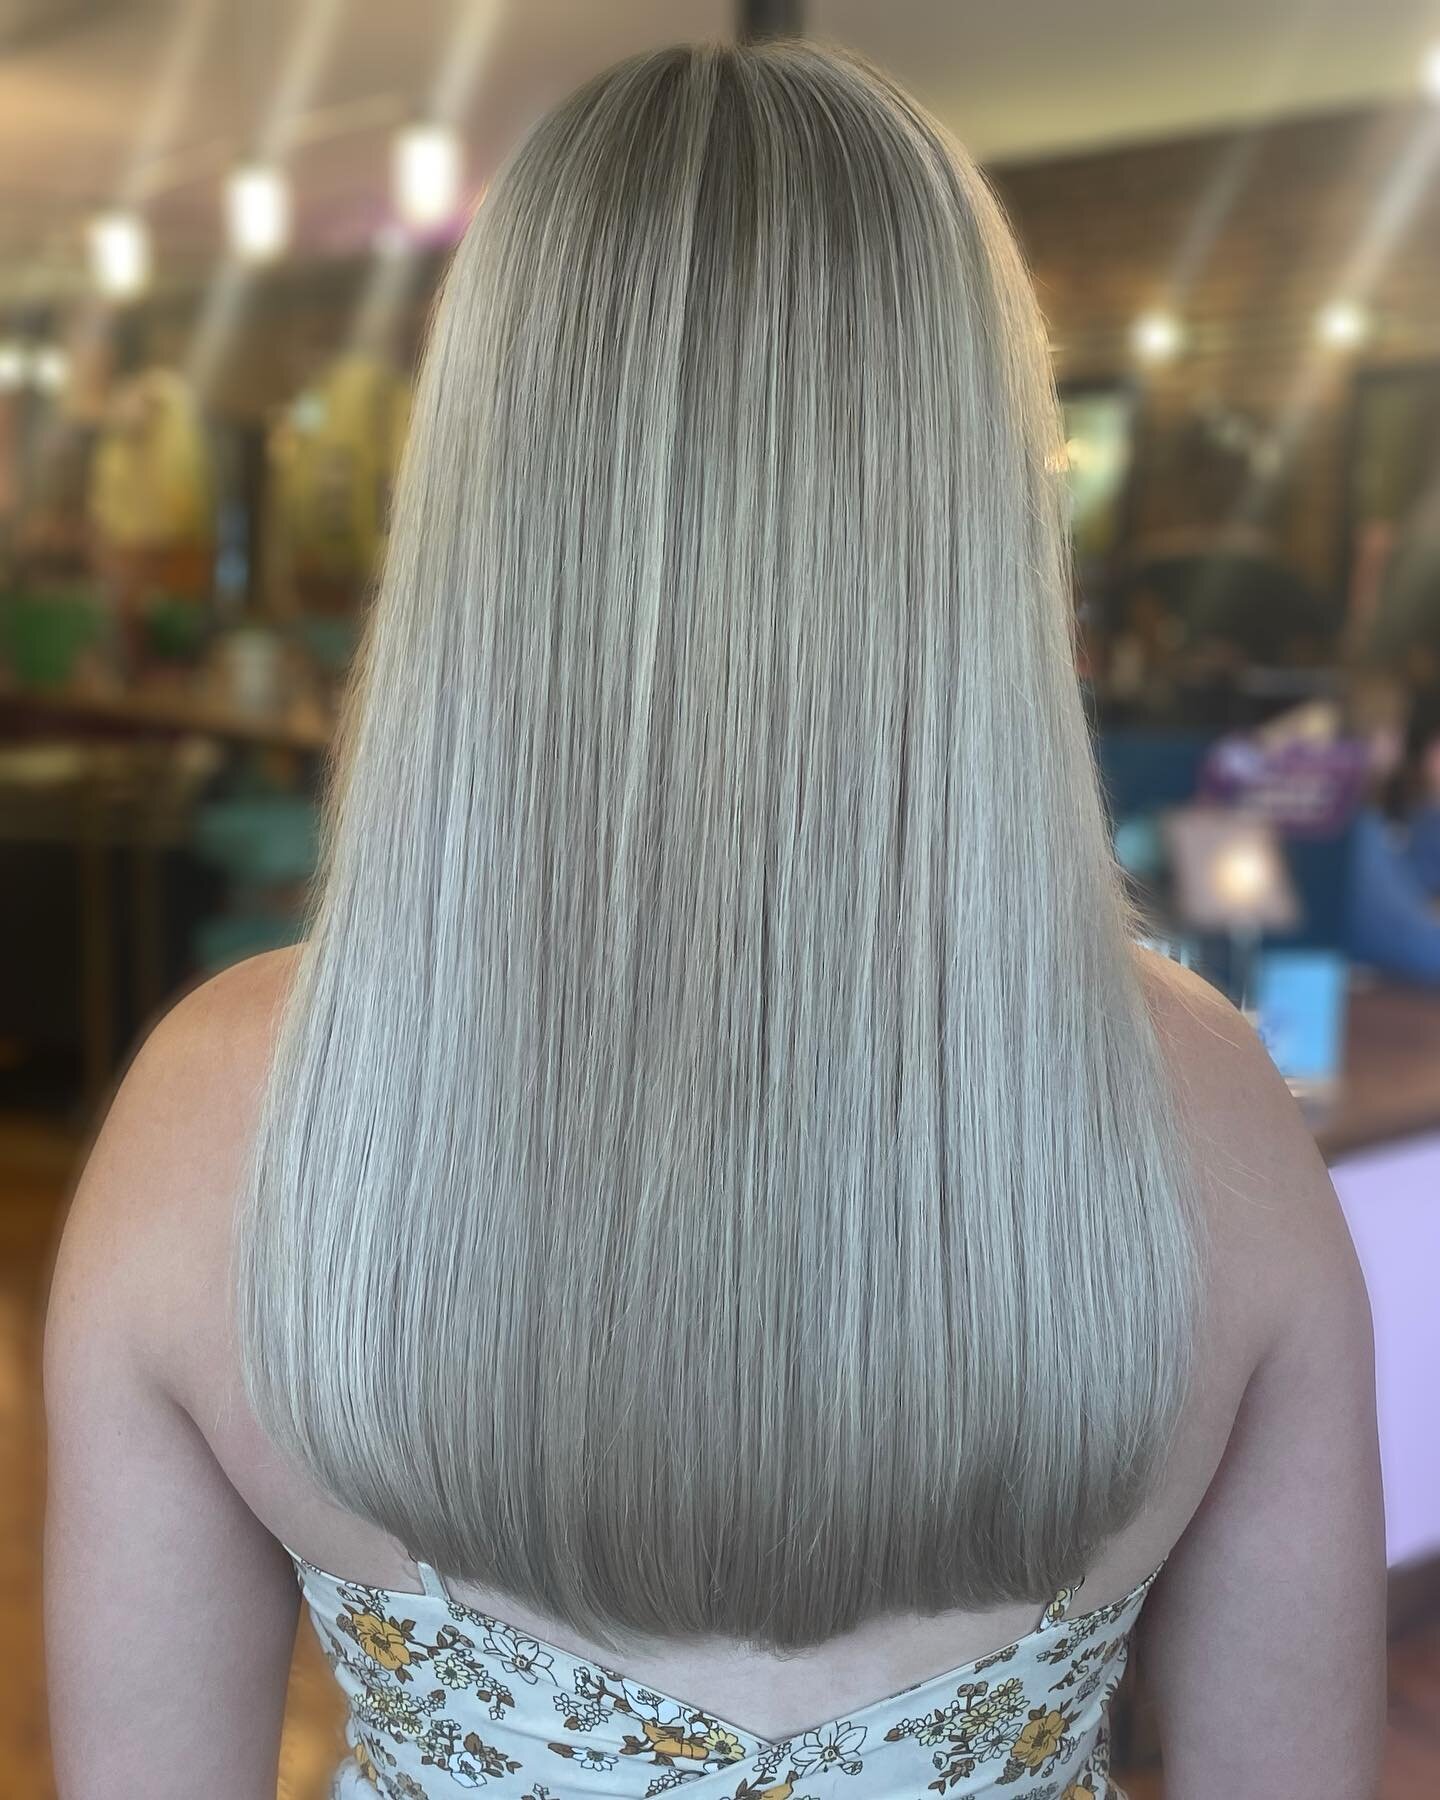 Full head of baby lights to give that full coverage feel, but with a softer grow out💙

#lexingtonky #sharethelex #blonde #blondehair #blondehairdontcare #lexingtonhairstylist #lexingtonstylist #lexingtonhair